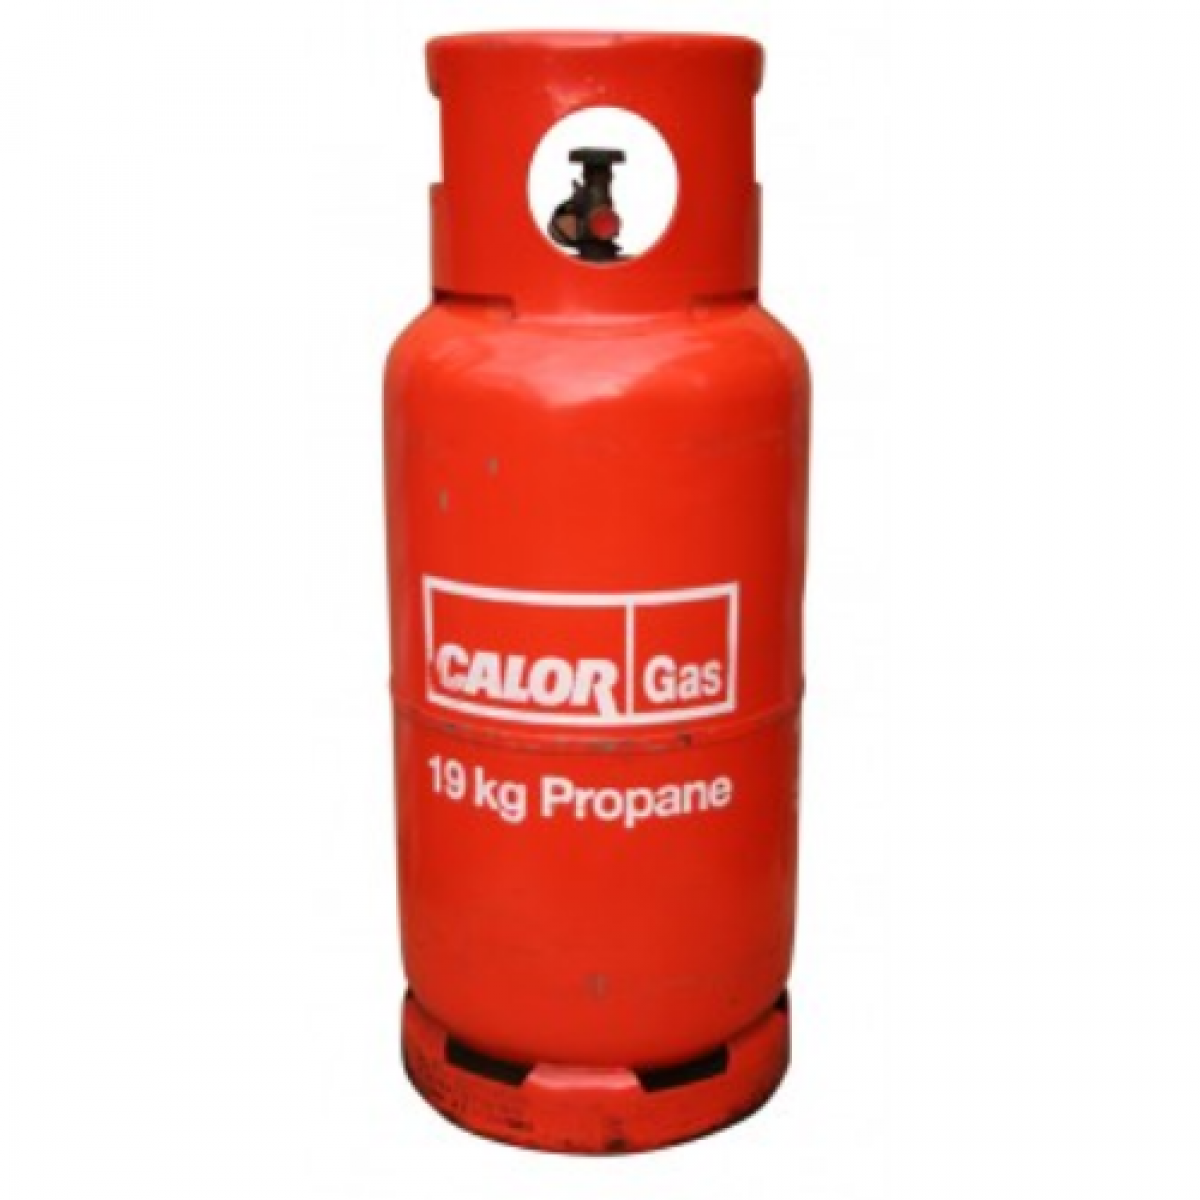 47Kg Propane Gas Bottle, Commercial Gas Heating